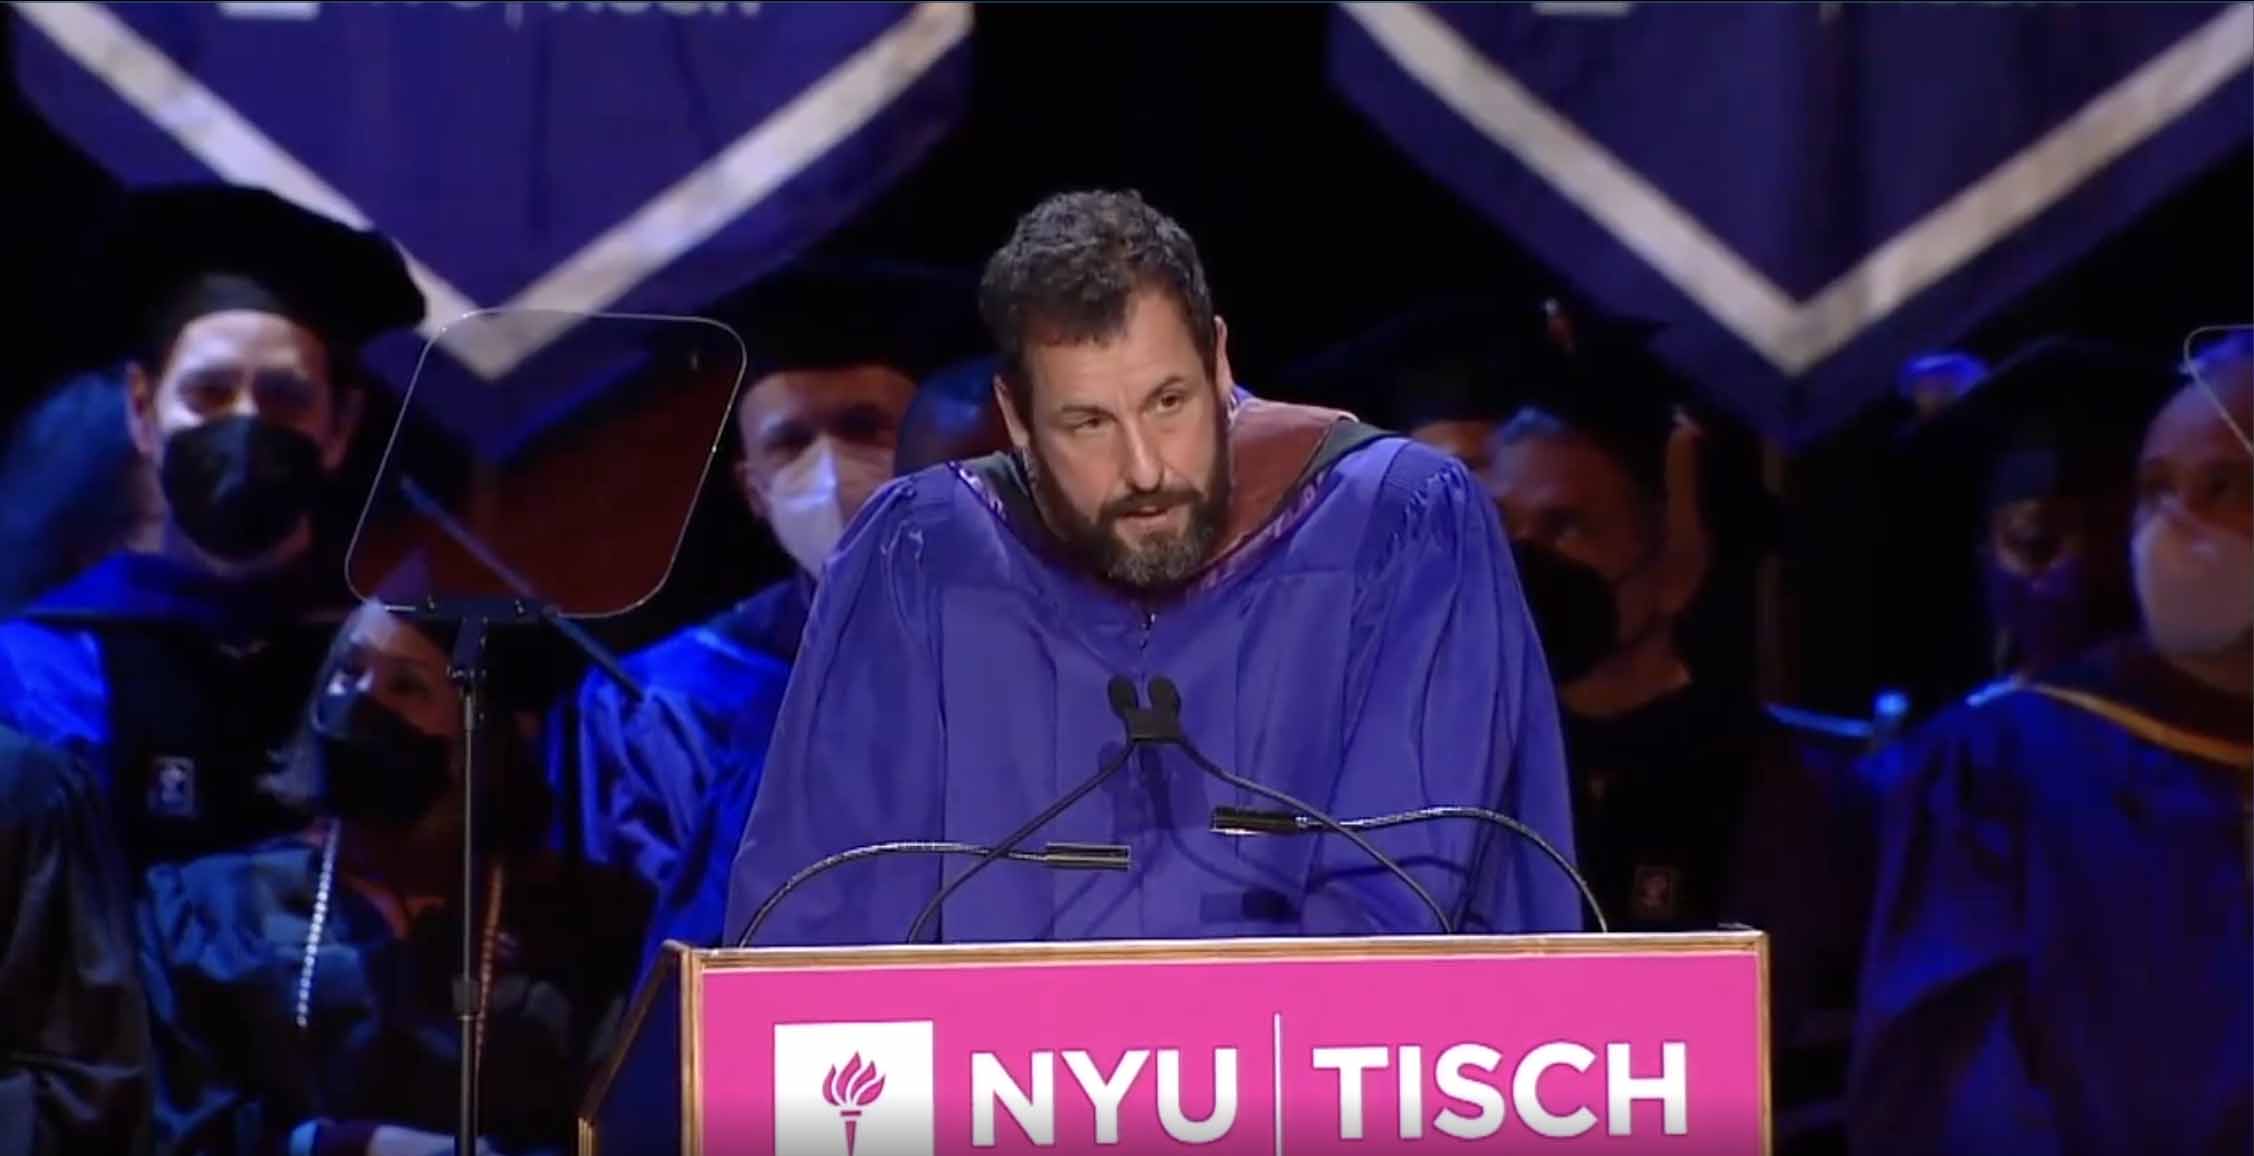 Adam Sandler Gives Hilarious NYU Tisch School Of The Arts Grad Speech, Jokes That They Chose The Arts Because They "Literally Can't Do Anything Else"